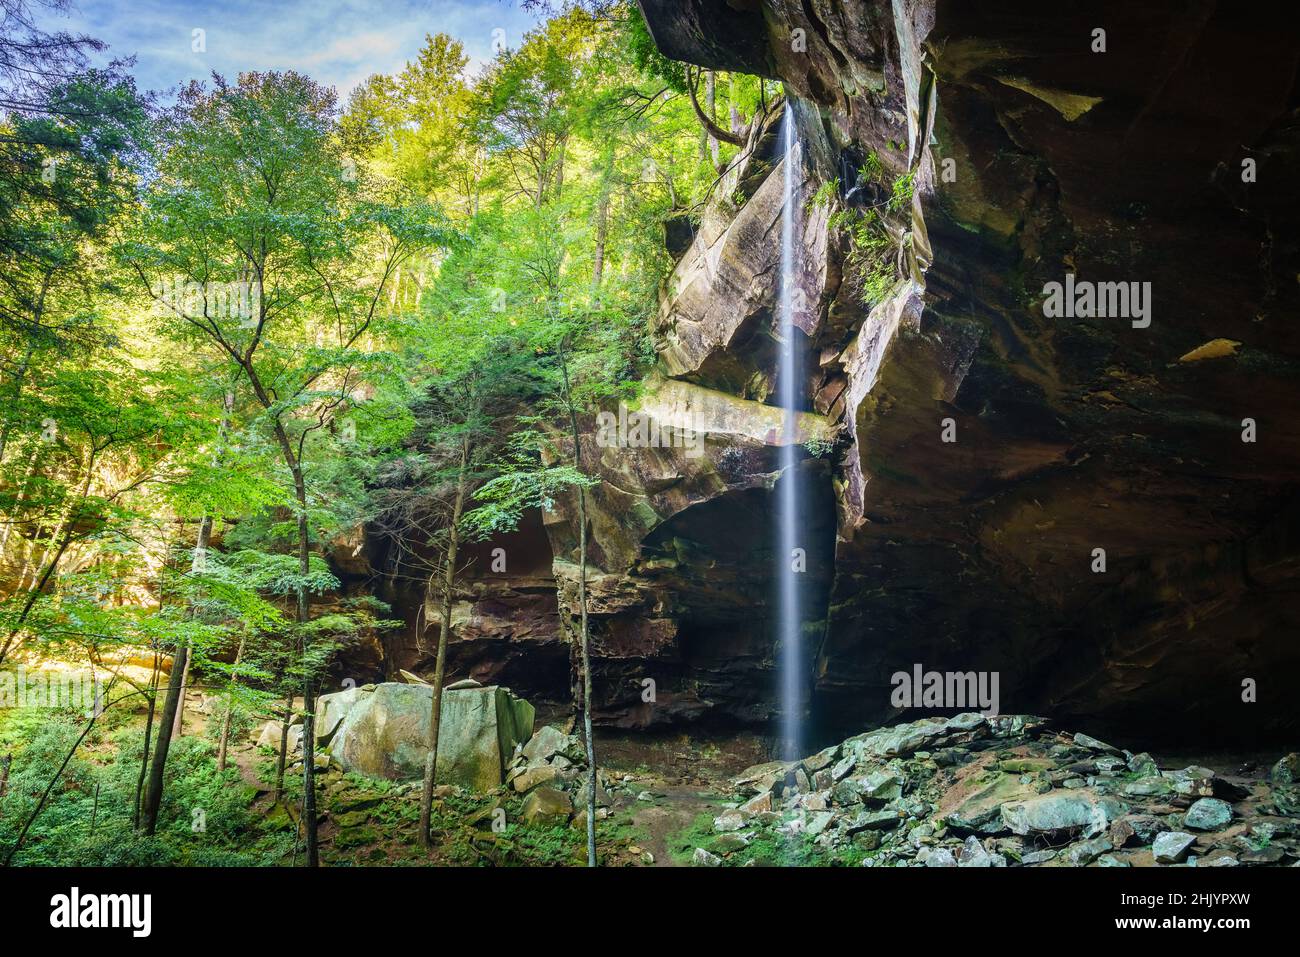 Scenic long exposure image of Yahoo Falls in Southern Kentucky Stock Photo